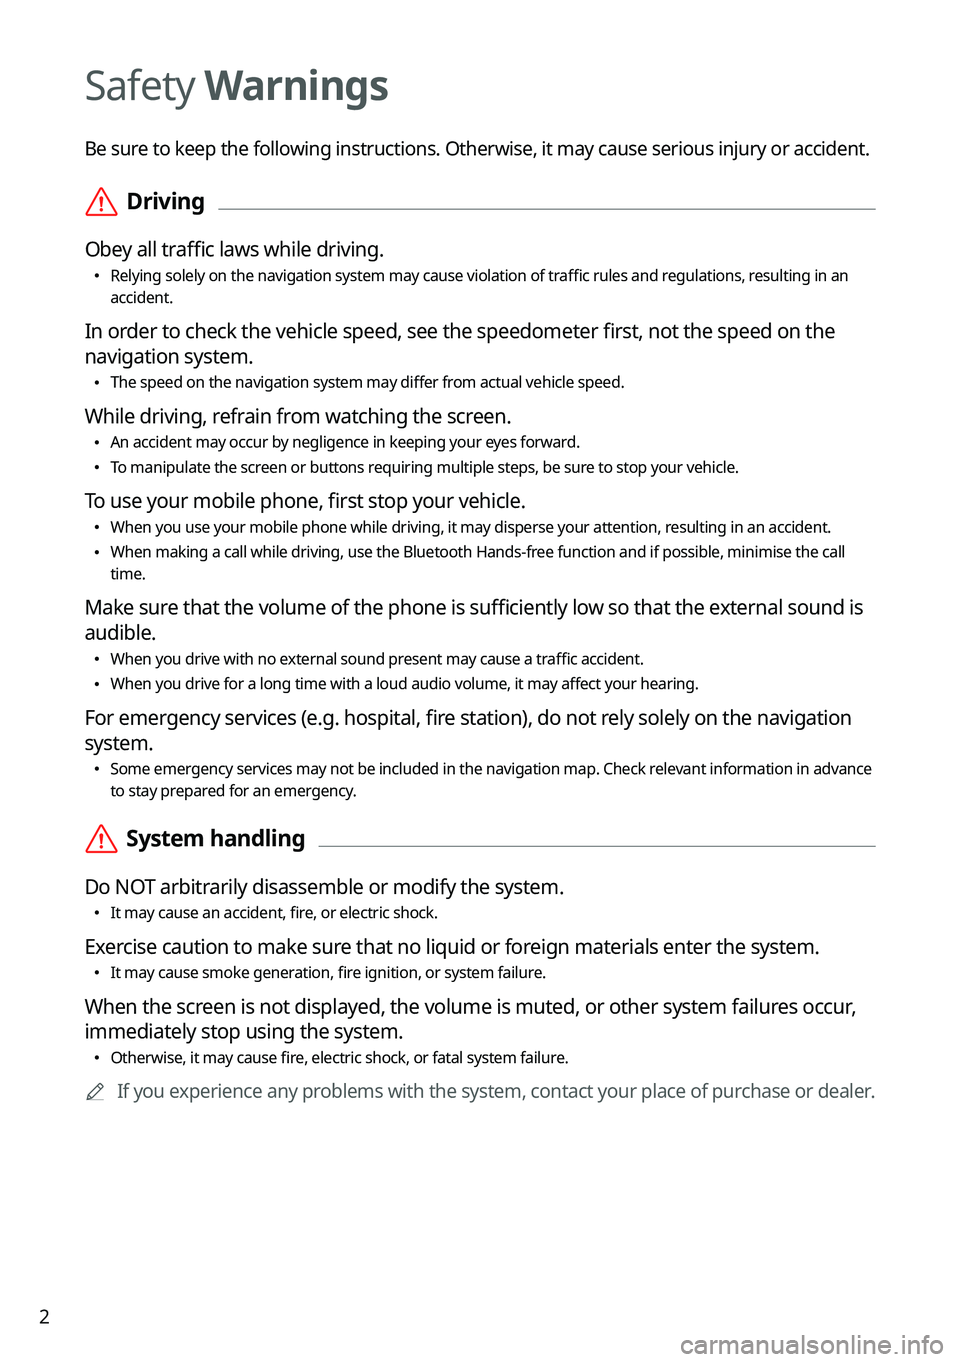 KIA FORTE 2021  Navigation System Quick Reference Guide 2
Safety Warnings
Be sure to keep the following instructions. Otherwise, it may cause serious injury or accident.
 \335Driving
Obey all traffic laws while driving.
 \225
Relying solely on the navigati